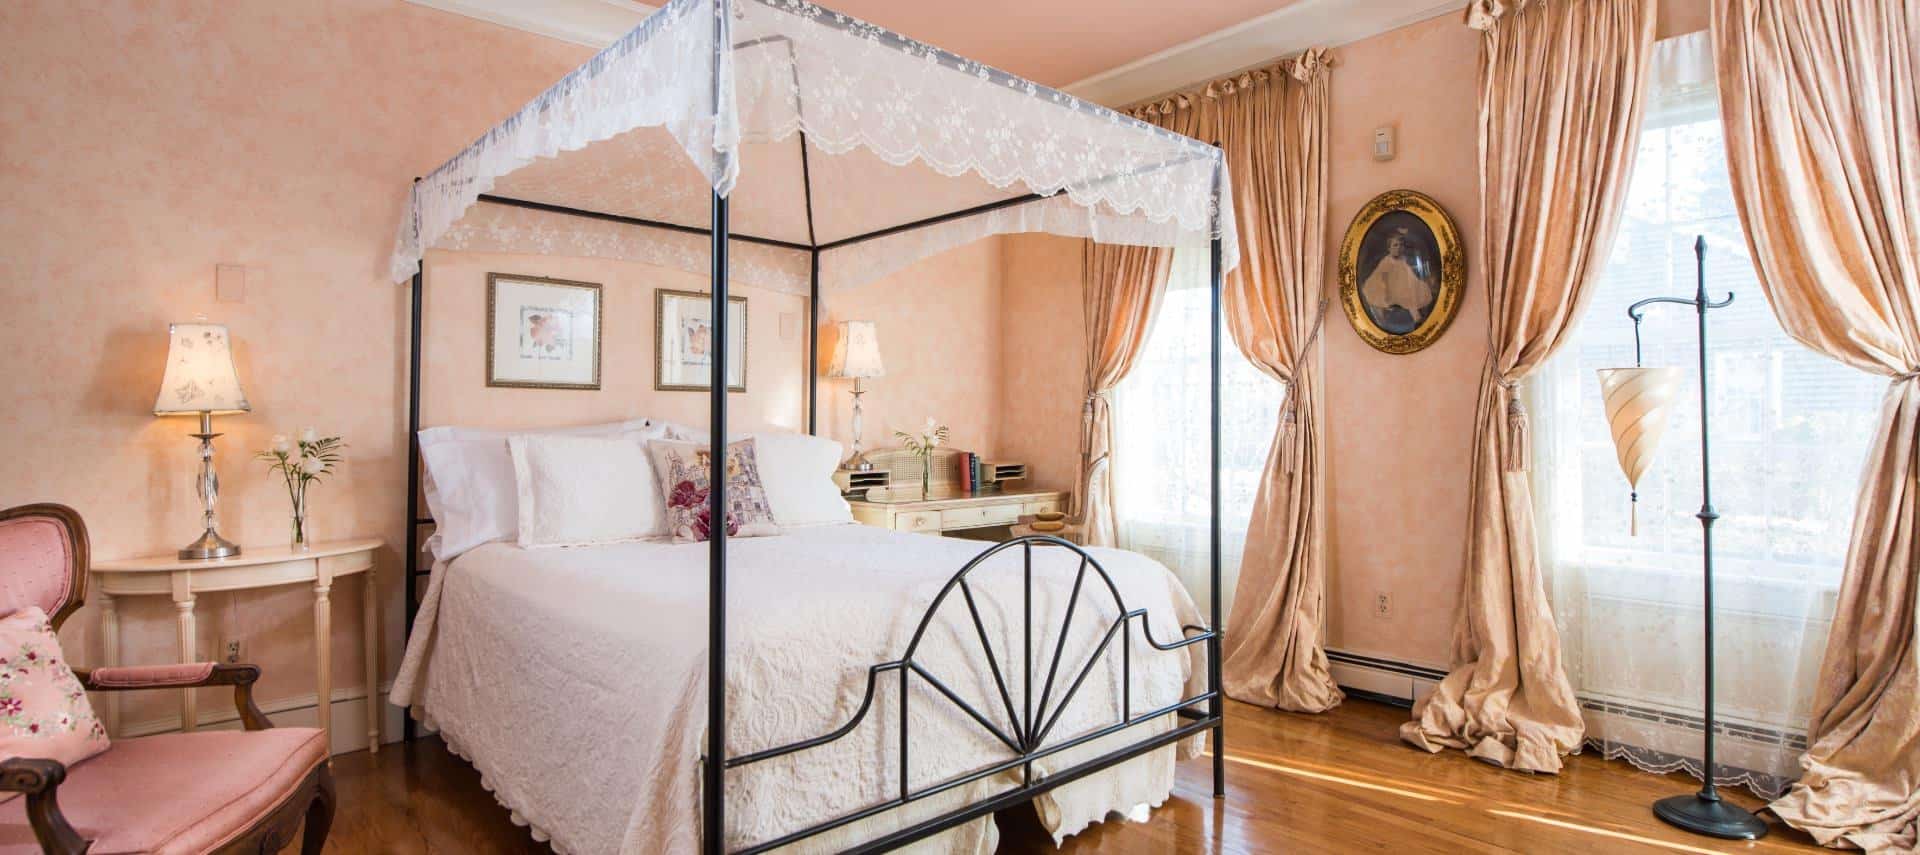 Bedroom with rod iron four-post canopy bed with white bedding, light colored wooden desk and chair in the corner, hardwood floors, peach floral wallpaper with peach drapery